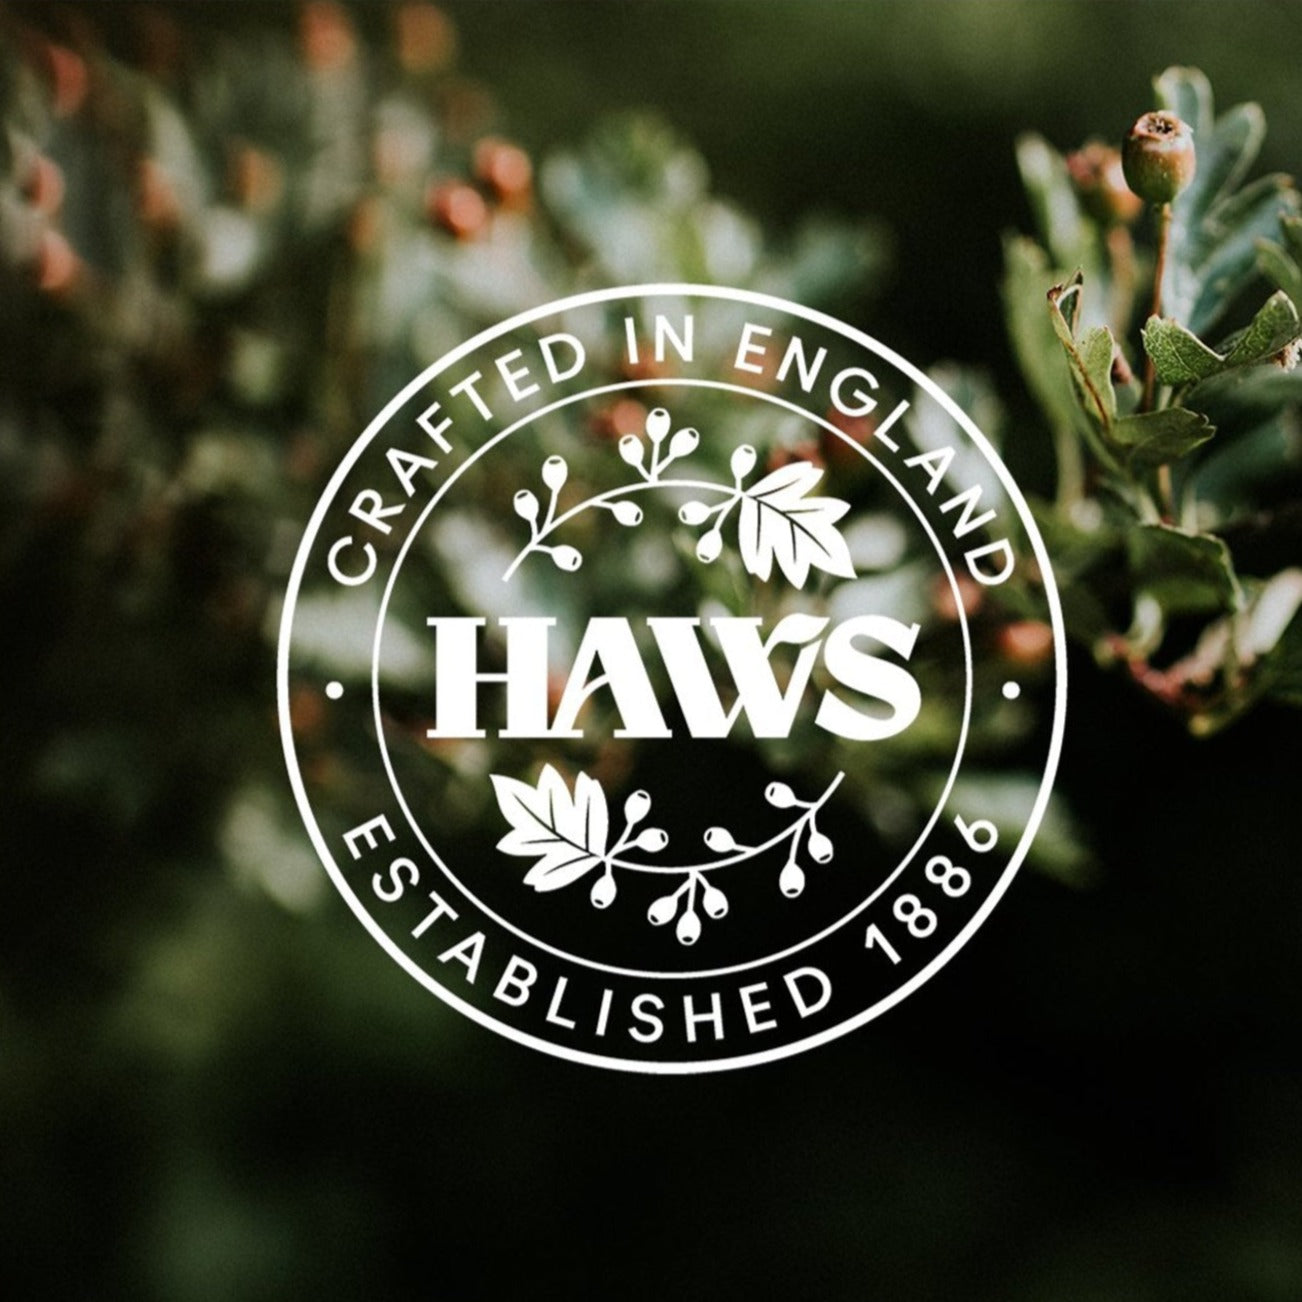 Haws watering cans logo. Crafted in England. Established 1886.